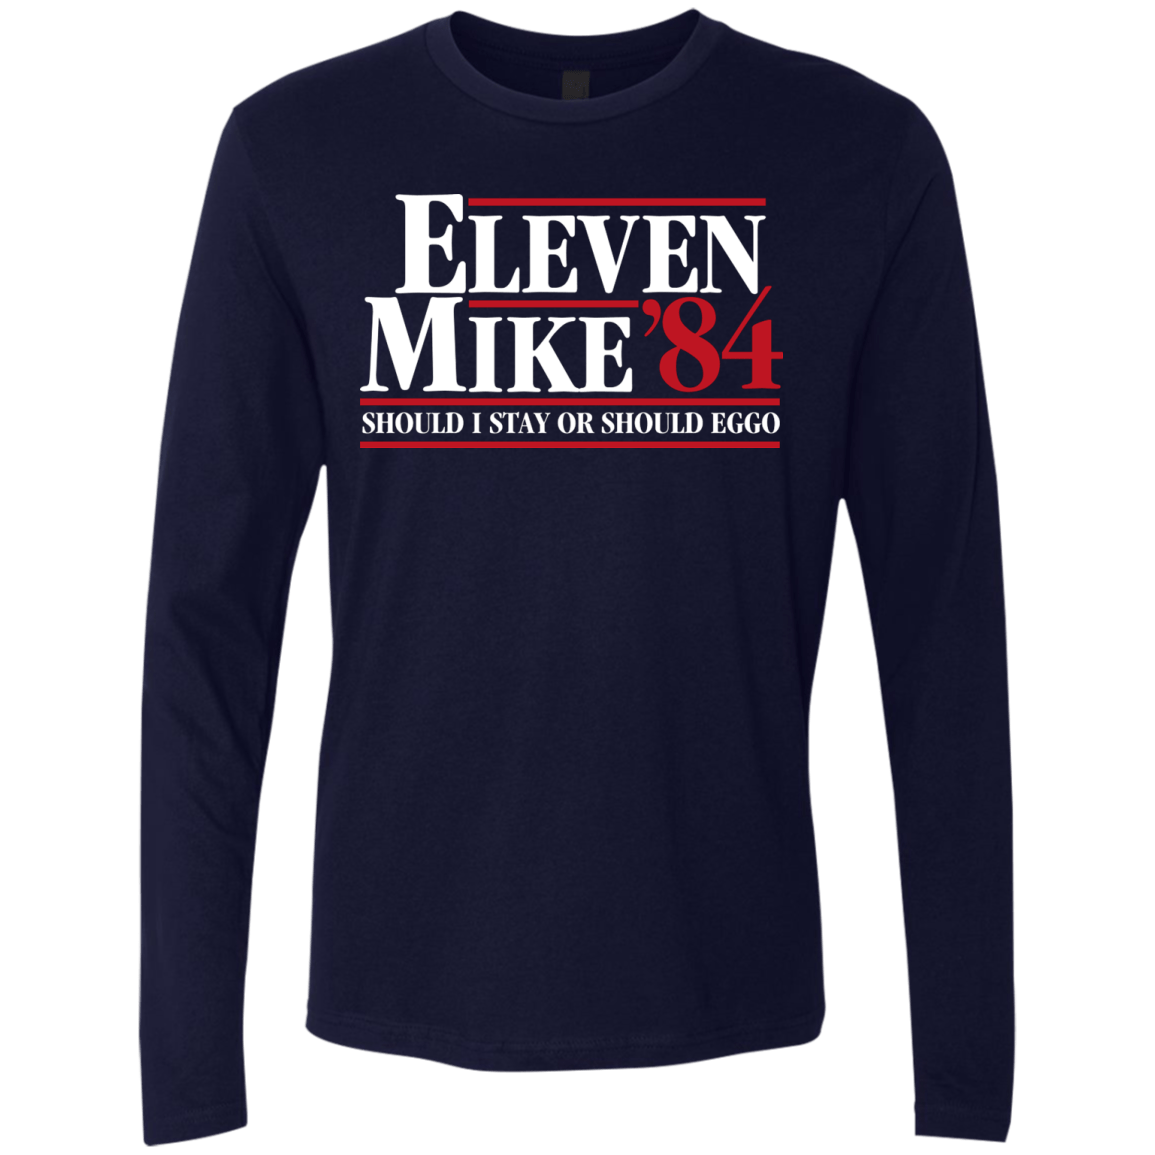 T-Shirts Midnight Navy / Small Eleven Mike 84 - Should I Stay or Should Eggo Men's Premium Long Sleeve